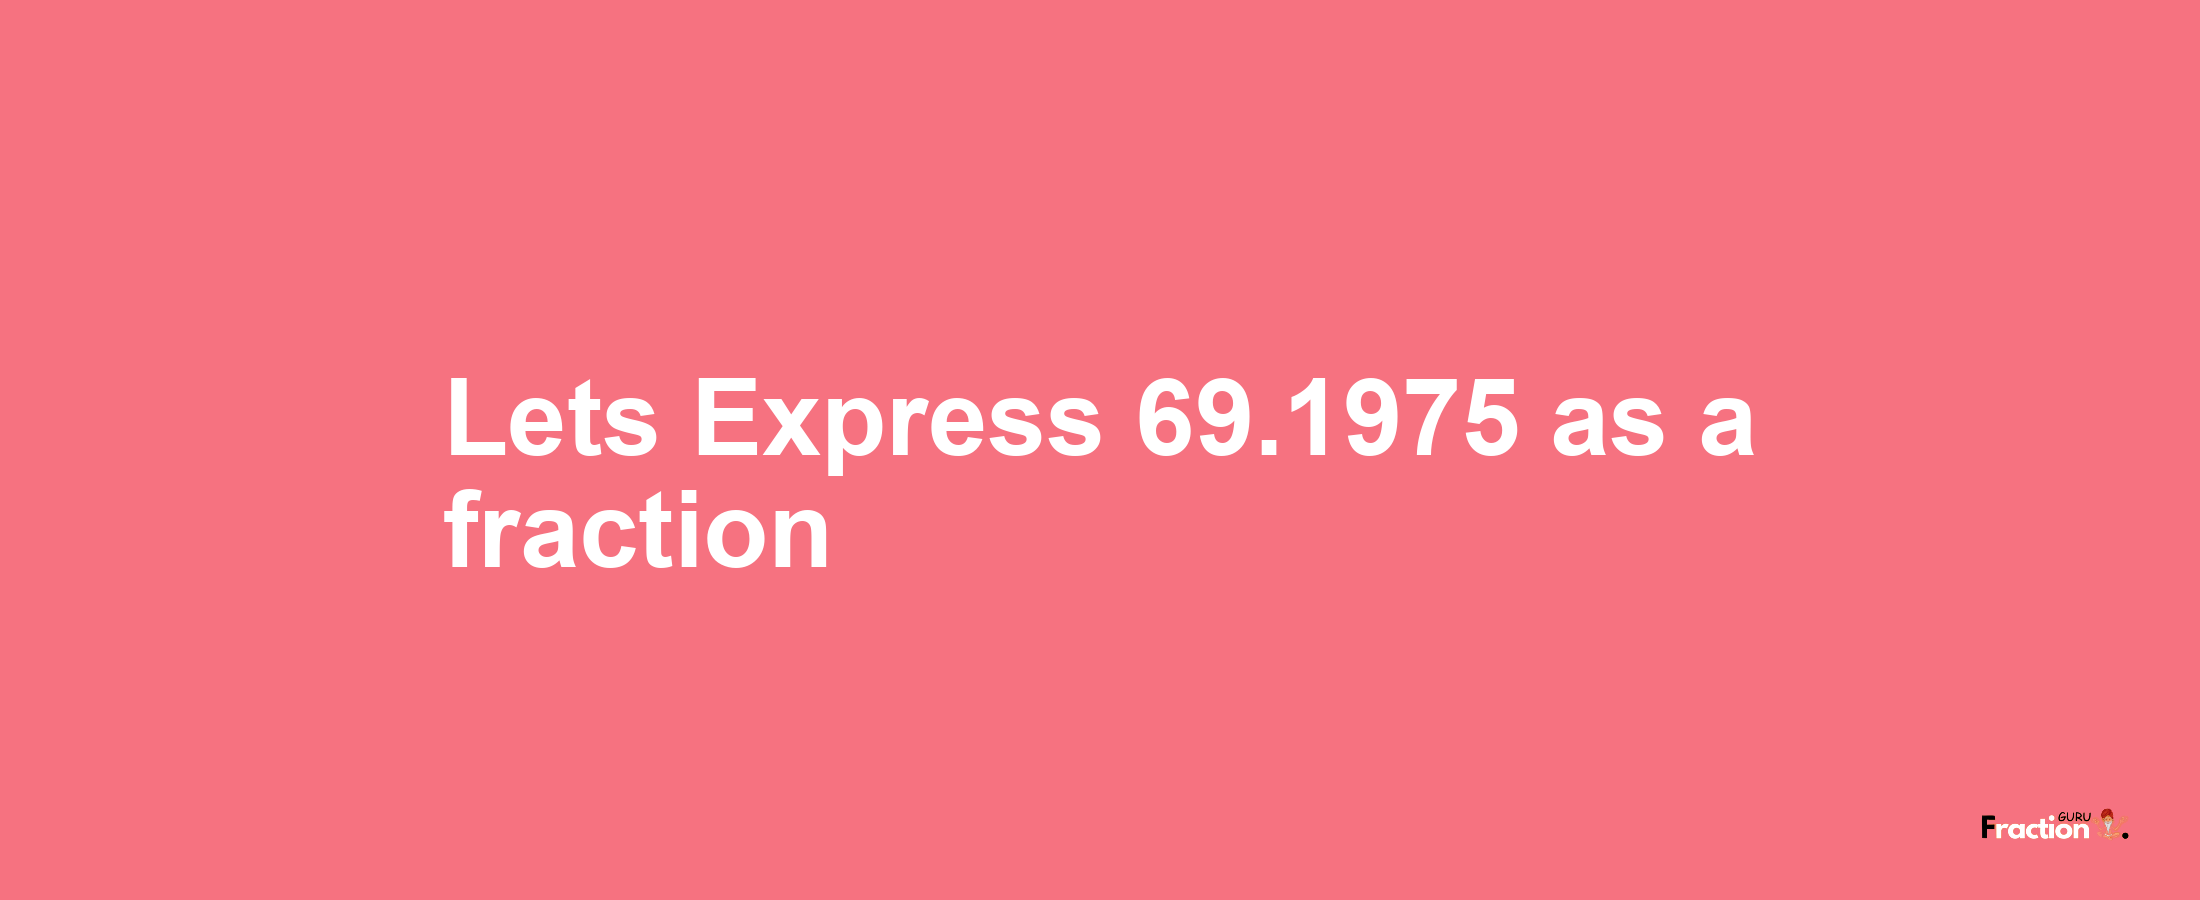 Lets Express 69.1975 as afraction